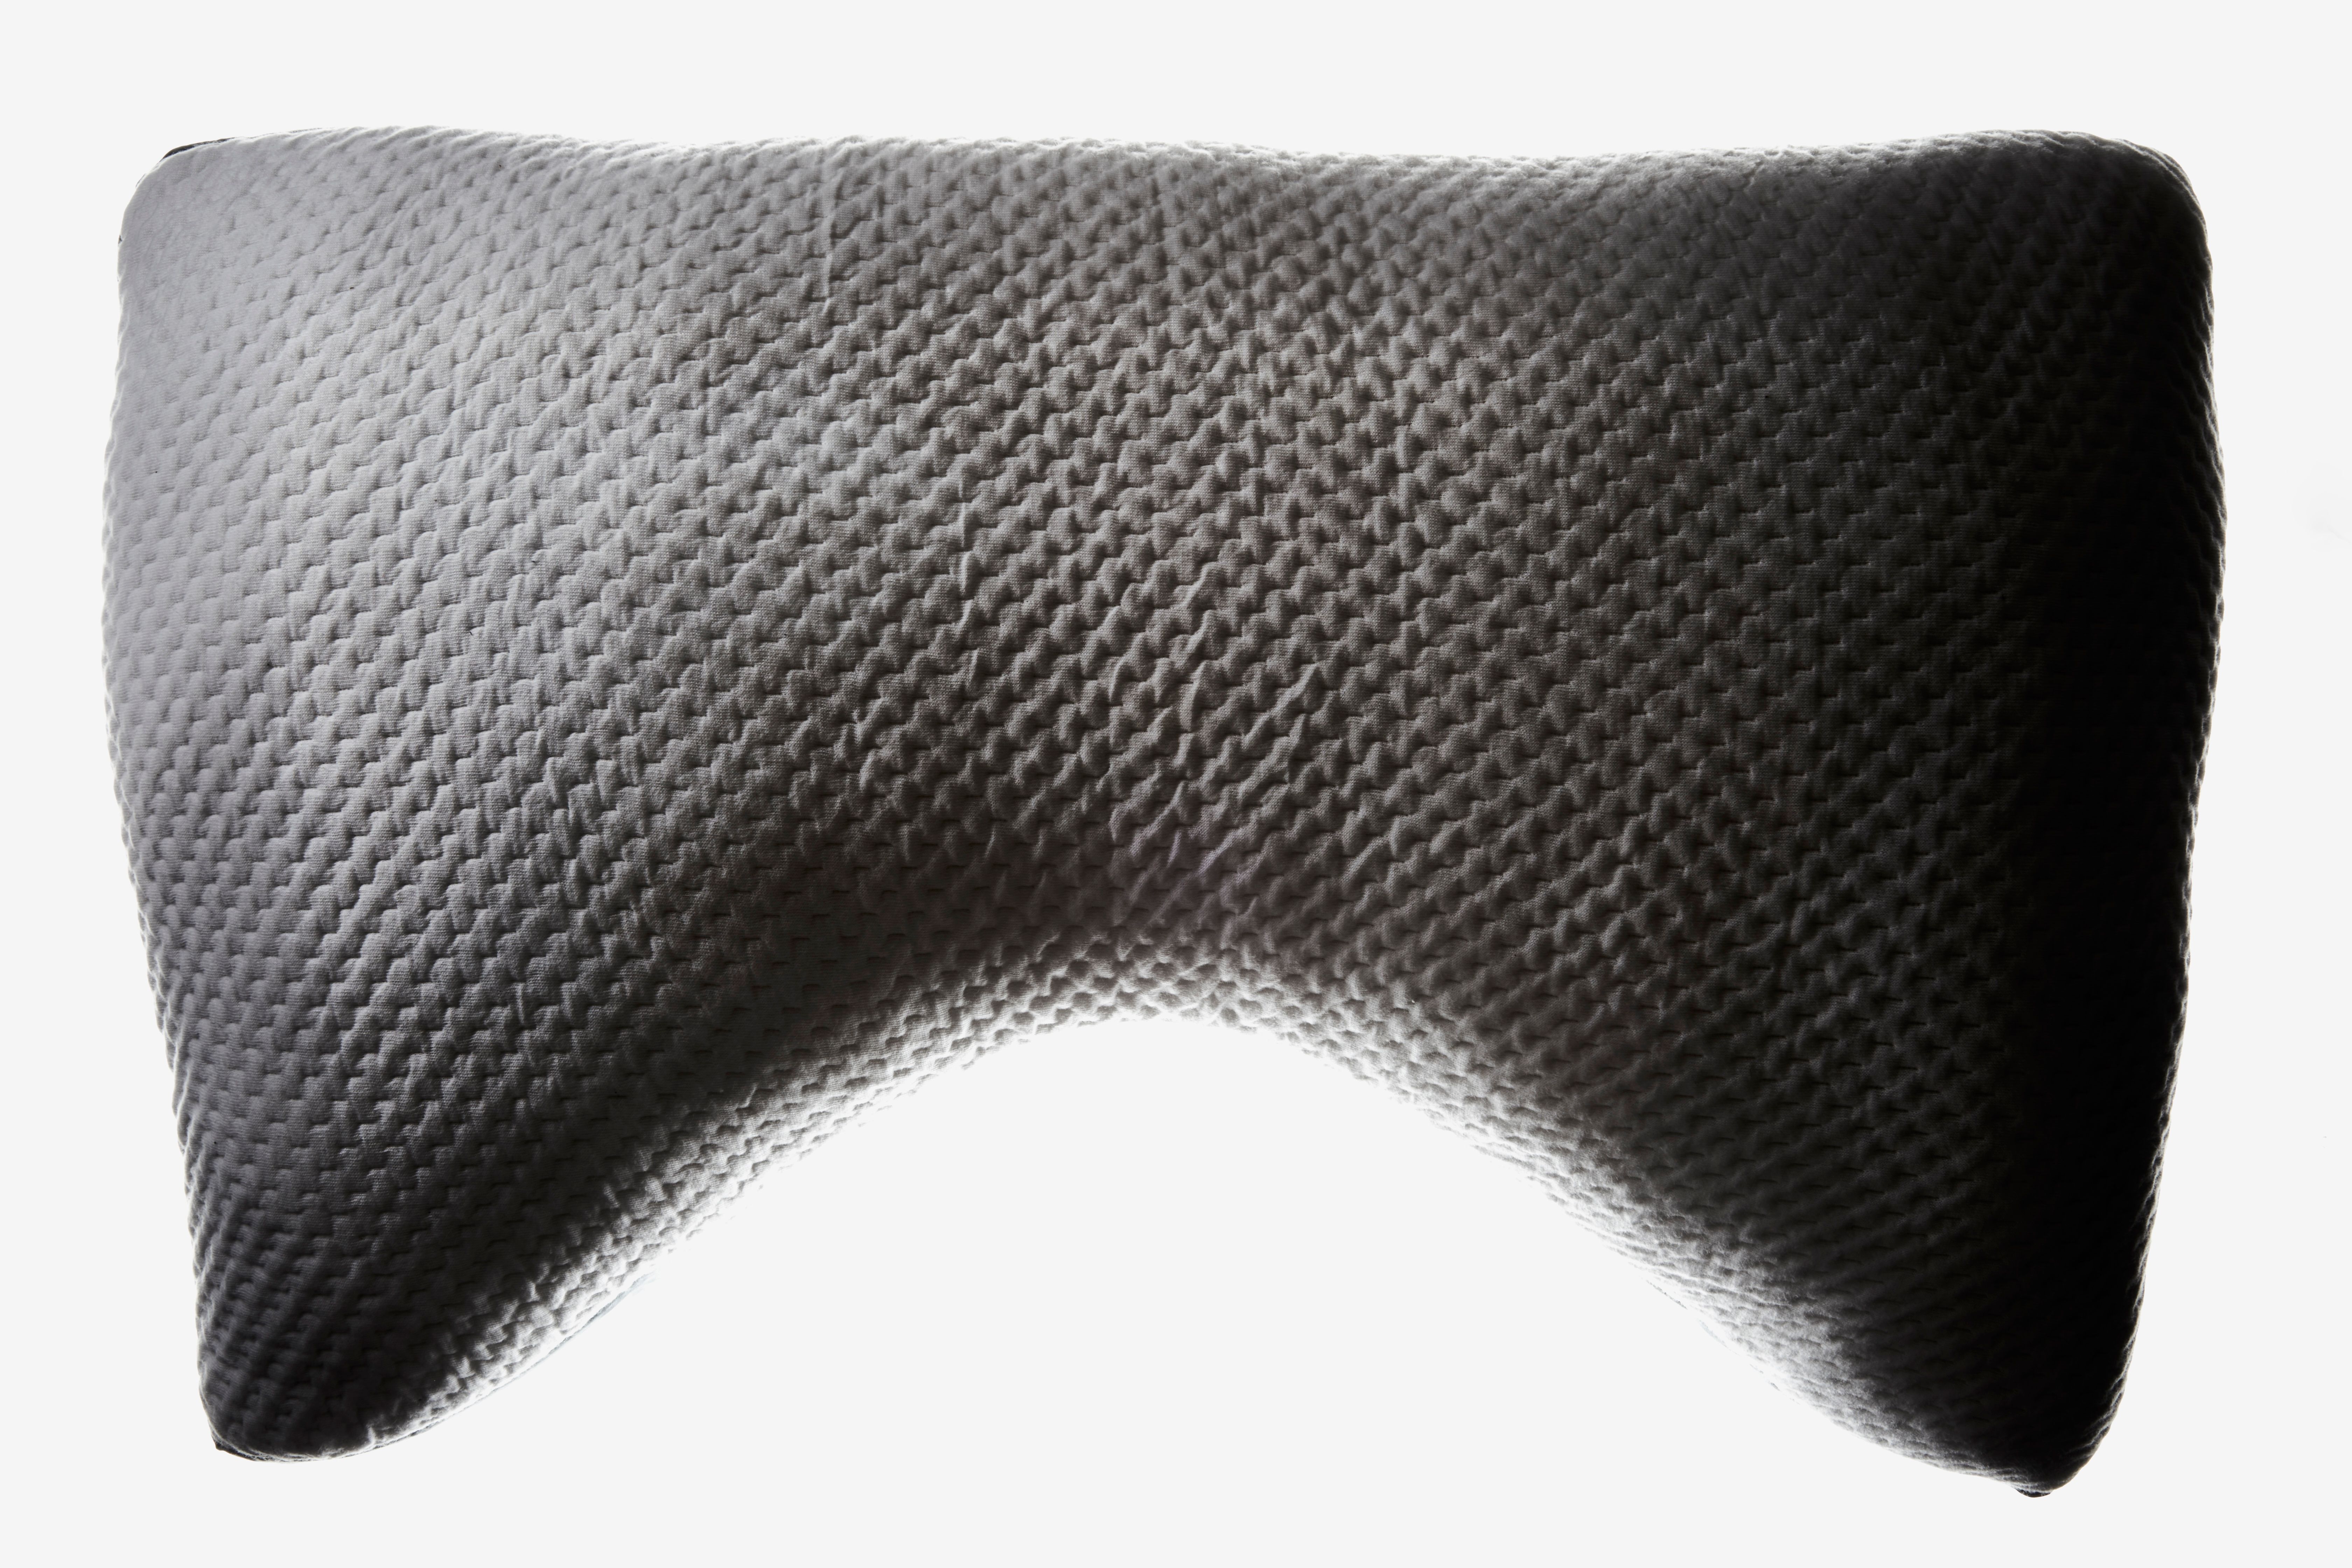 Charcoal Infused Memory Foam Knee Pillow with Cooling Gel Help Side Sleepers  Align Spine Back Pain Relief Orthopedic Leg Cushion